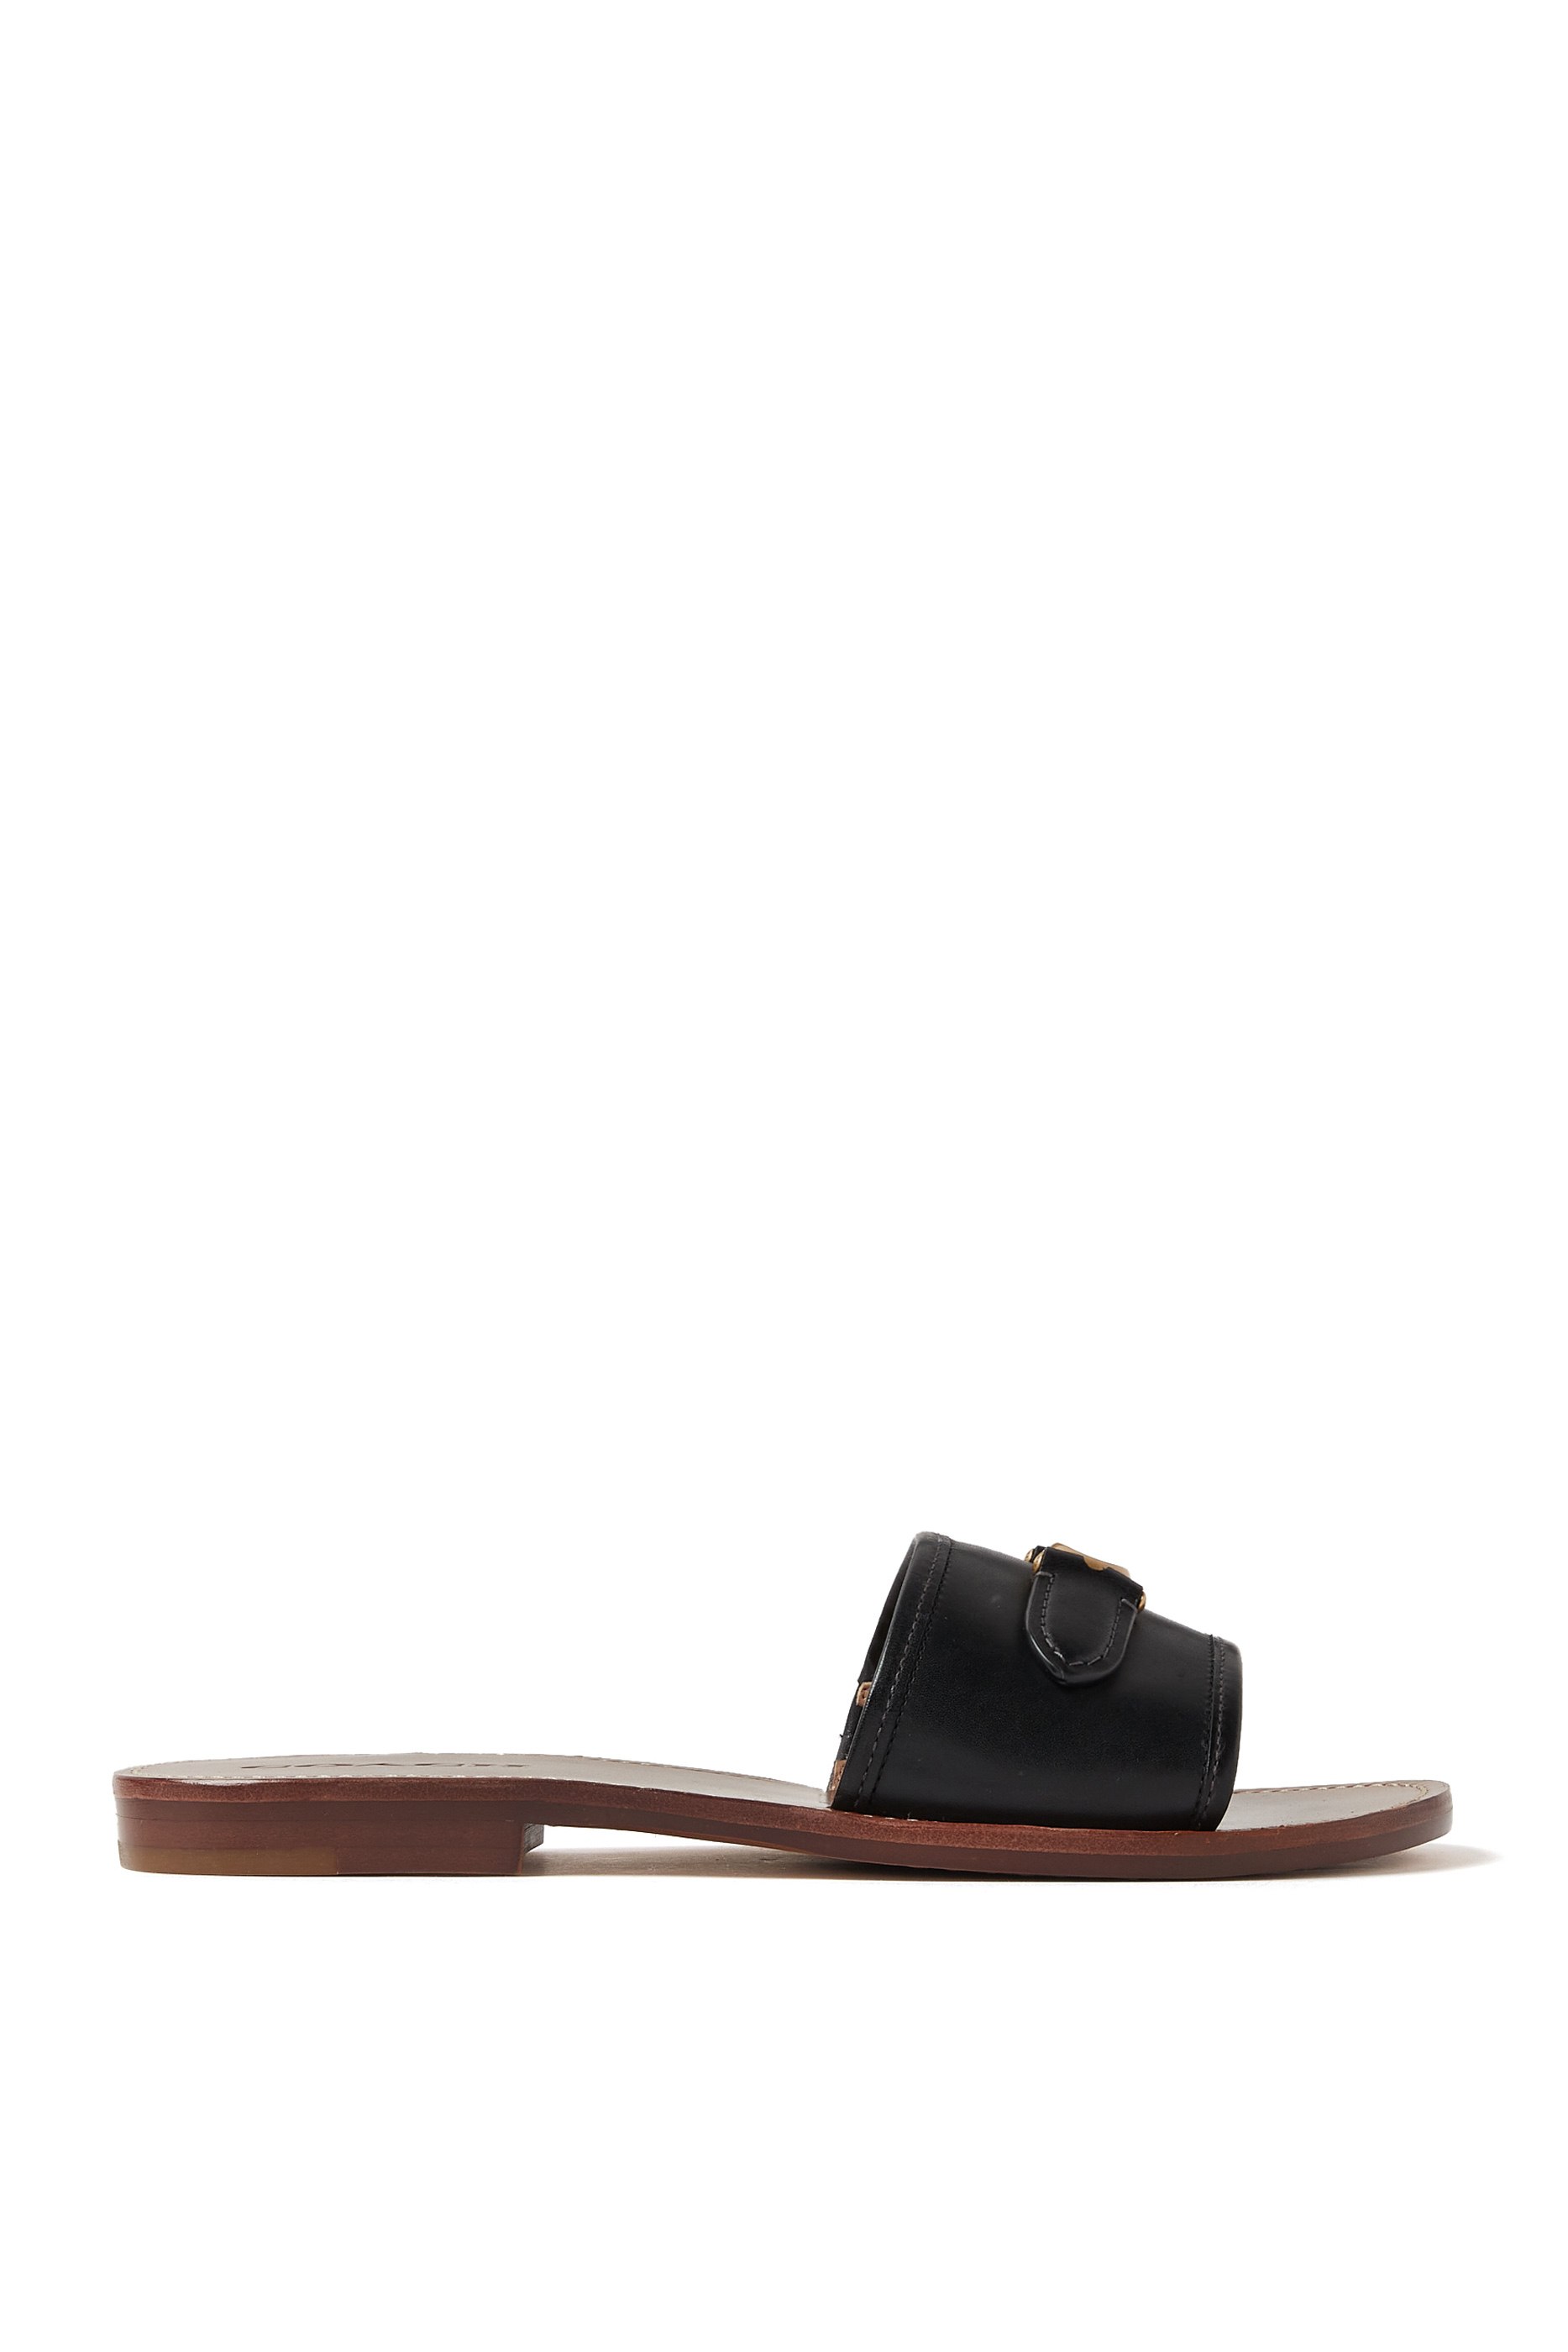 Buy Coach Ina Leather Sandals for Womens | Bloomingdale's UAE